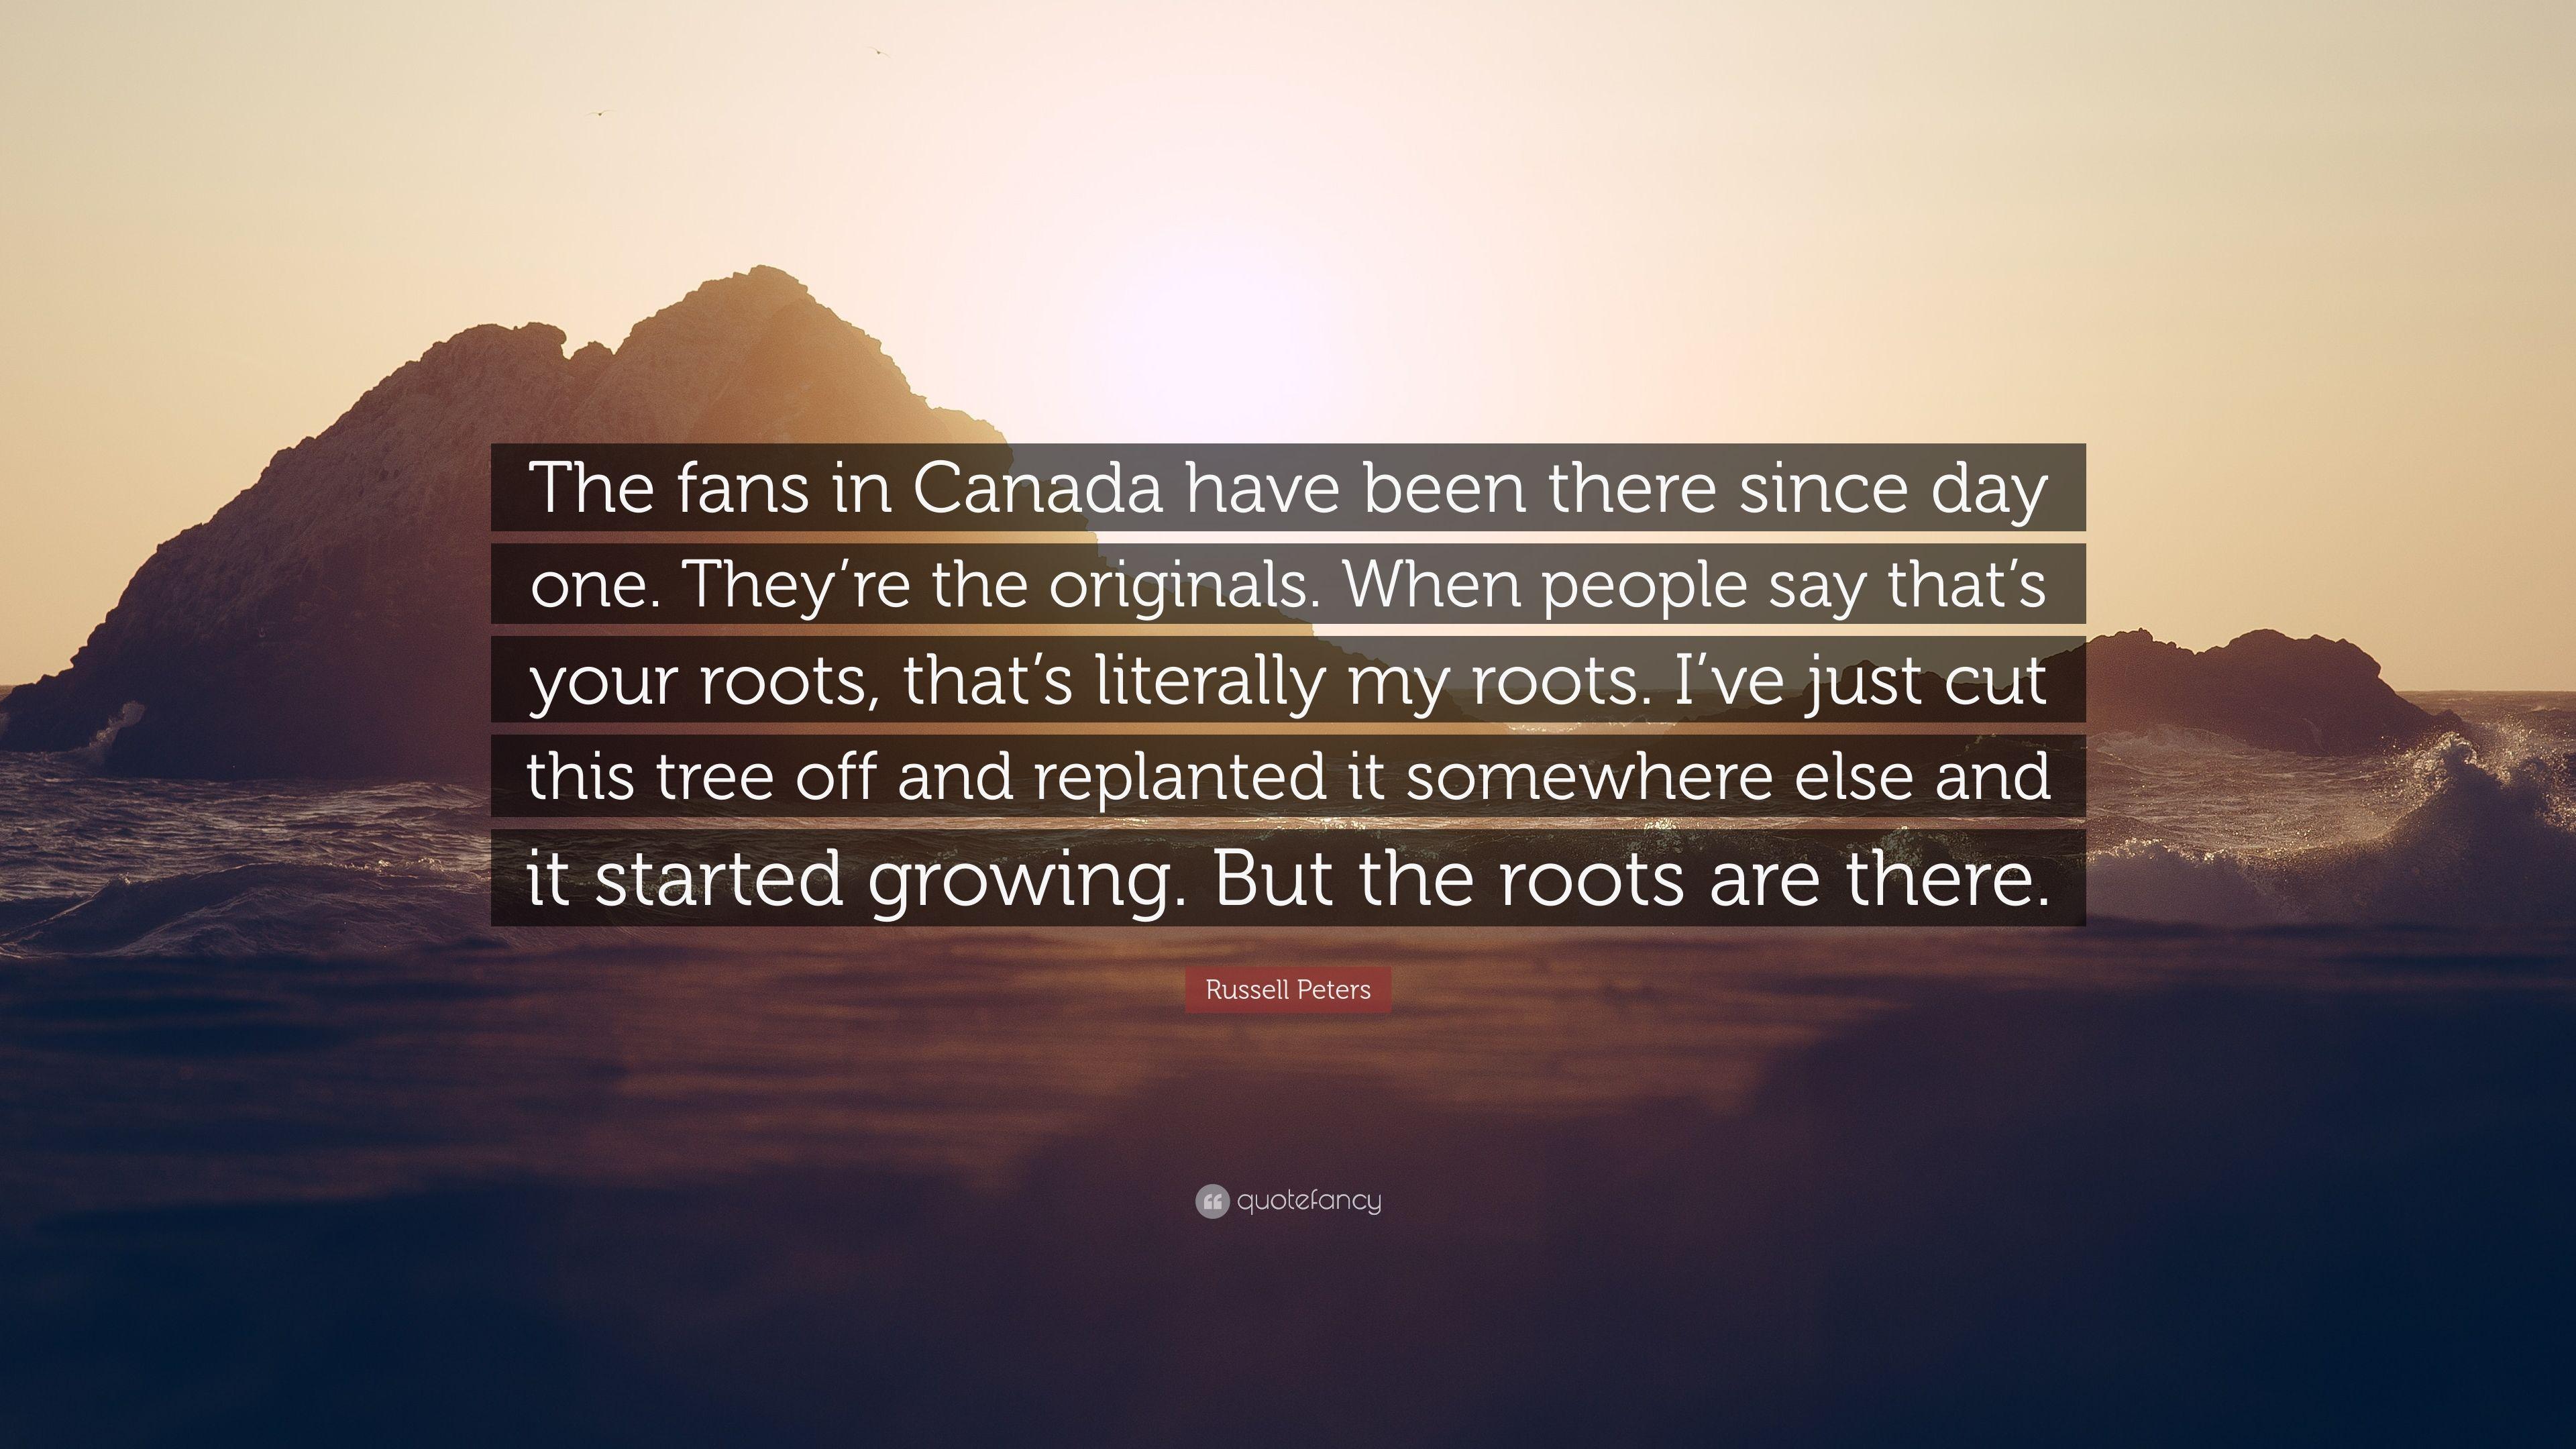 Russell Peters Quote: “The fans in Canada have been there